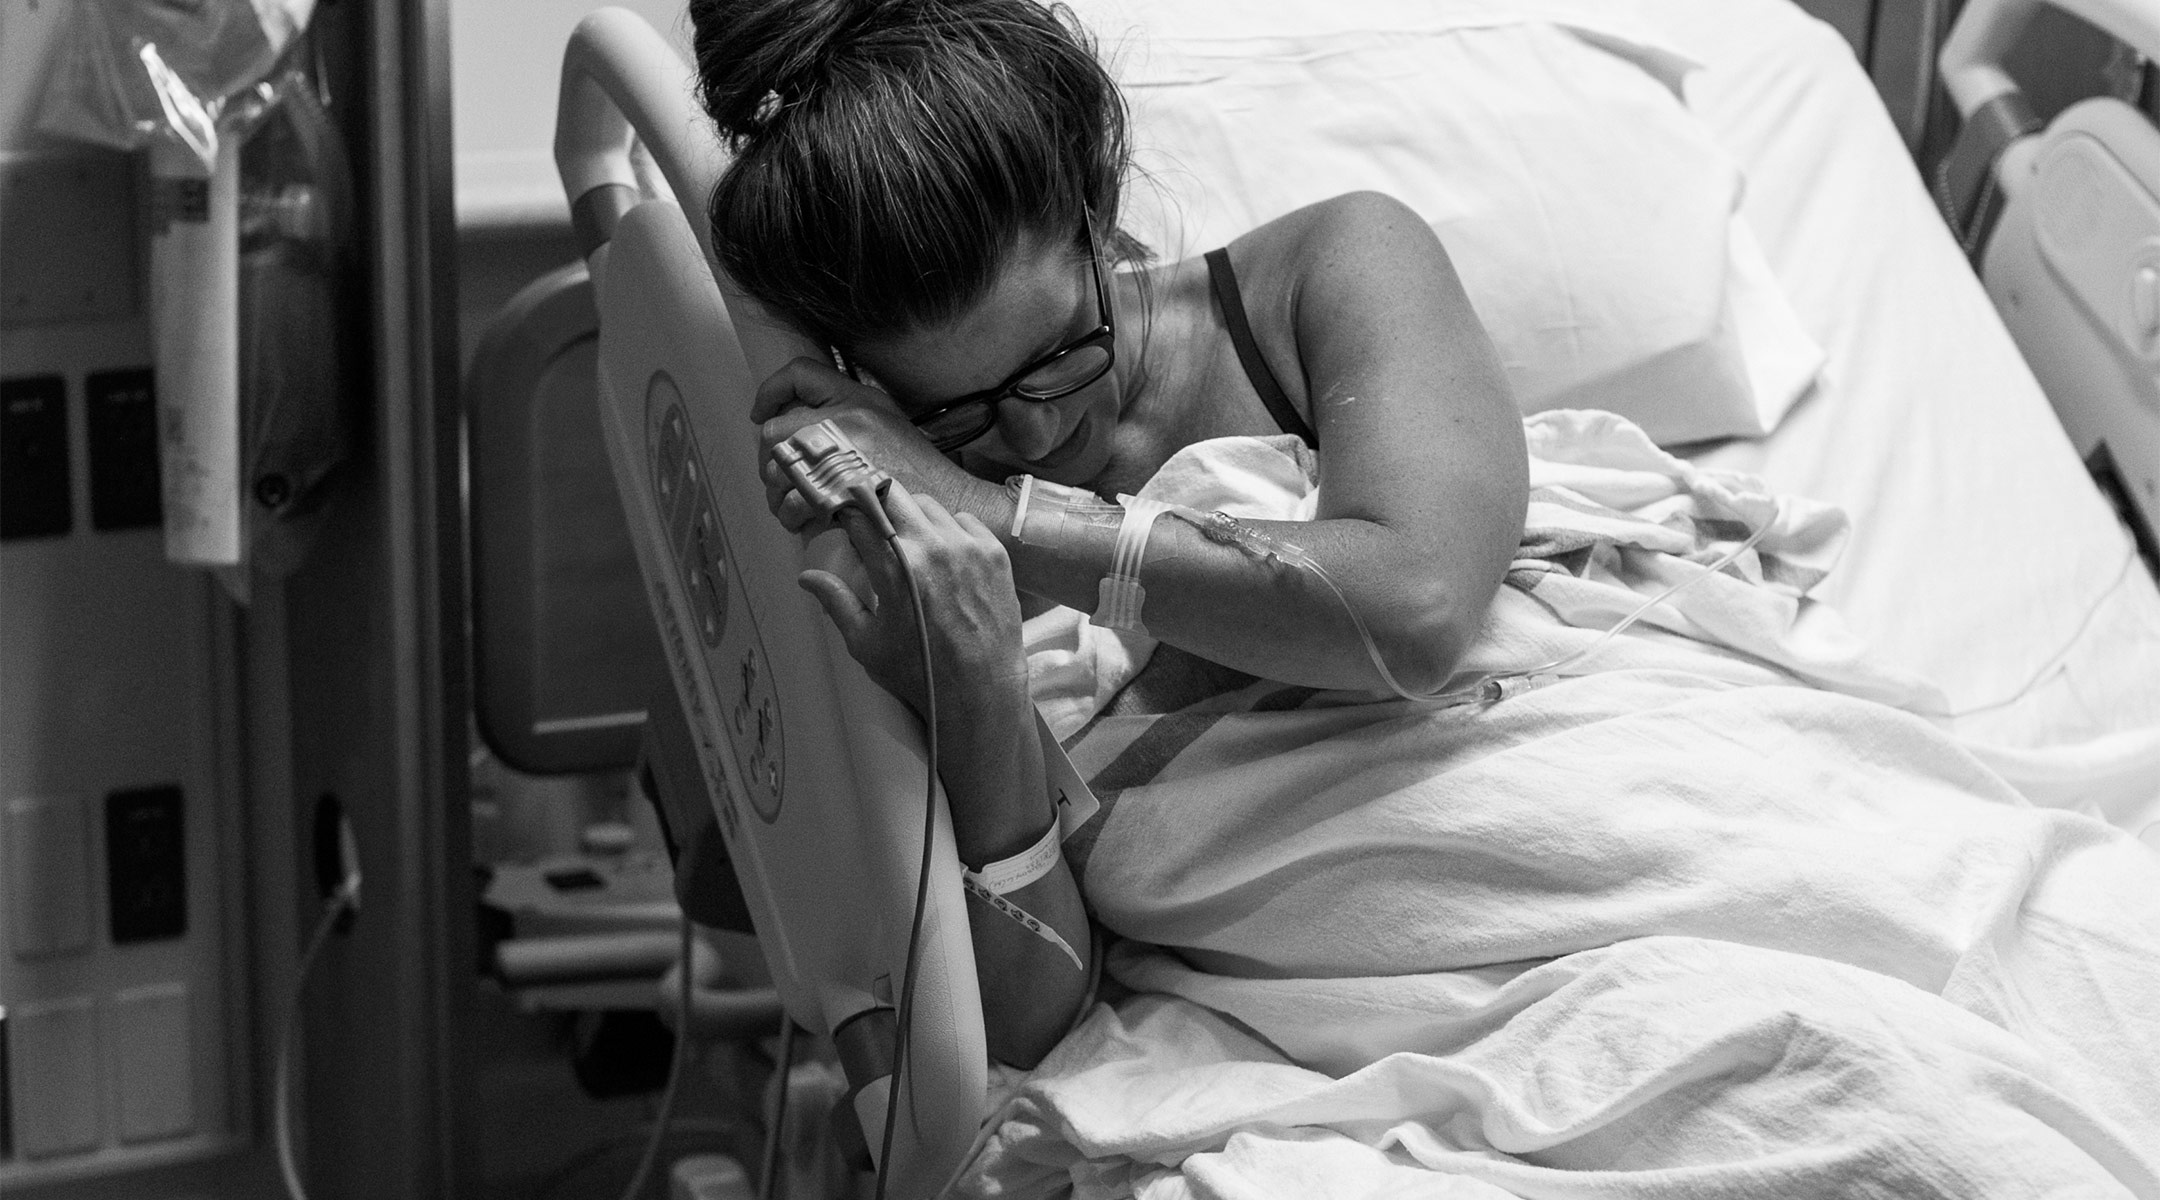 a photograph that shows the importance of moms healing after the birth of their child